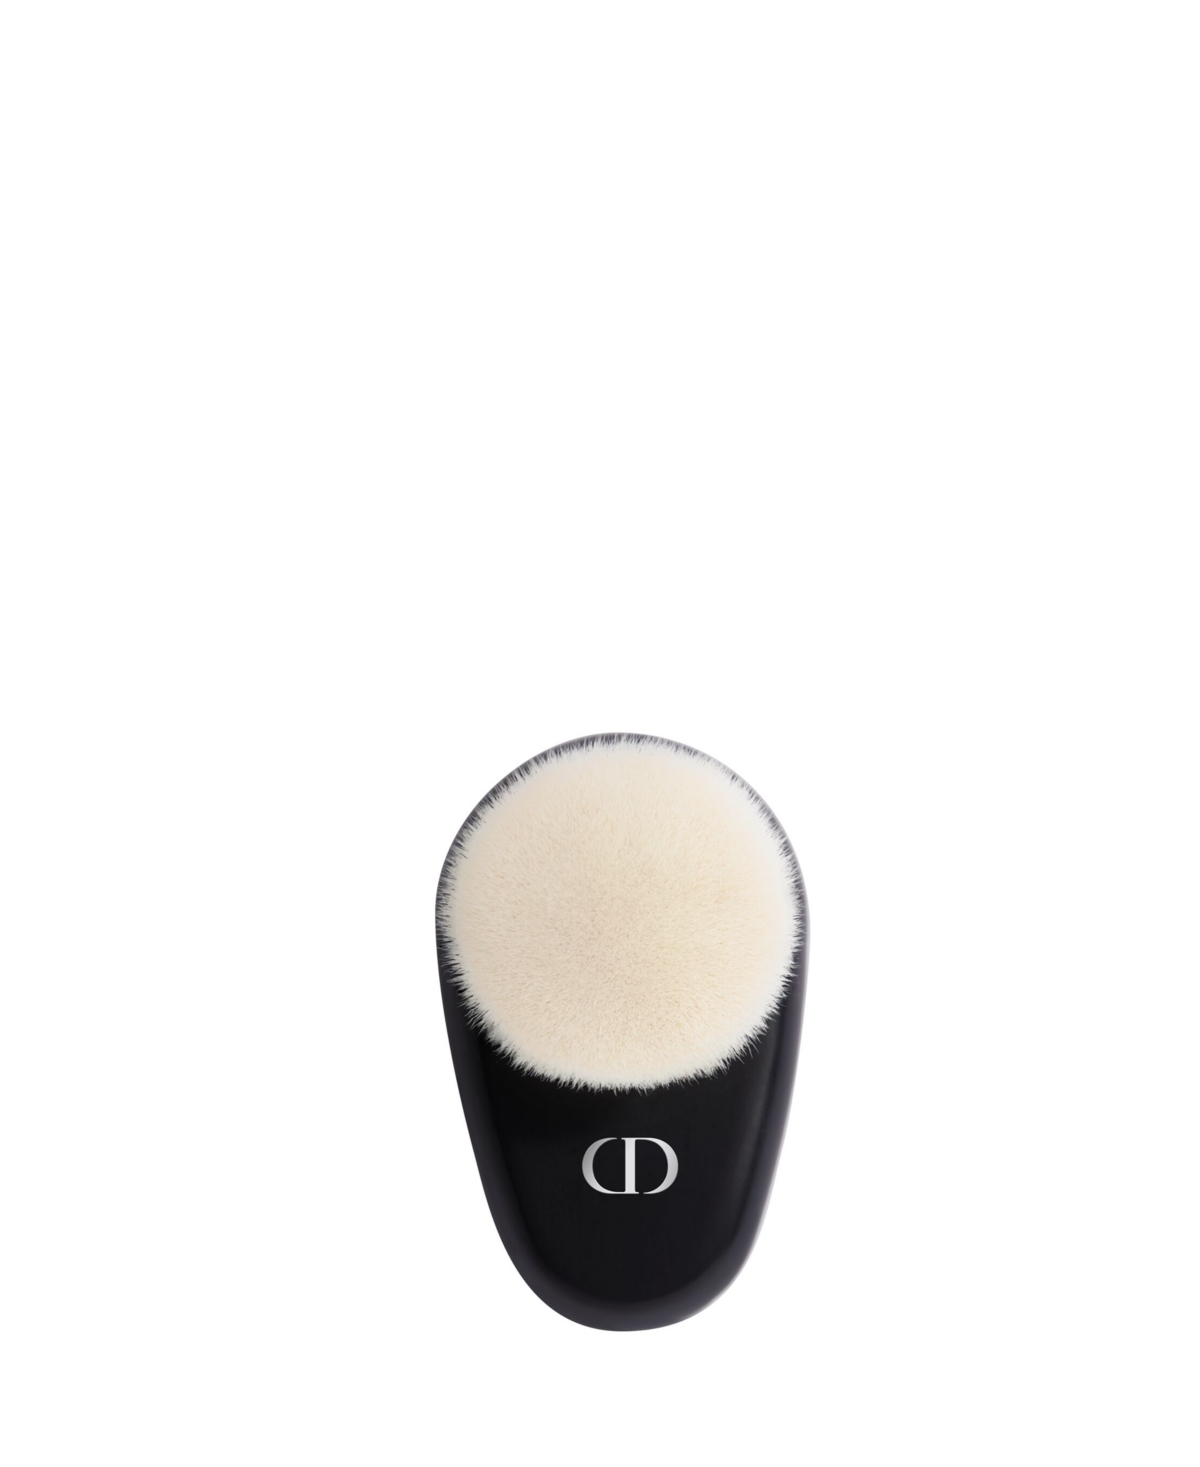 Dior Backstage Face Brush N°18 In No Color